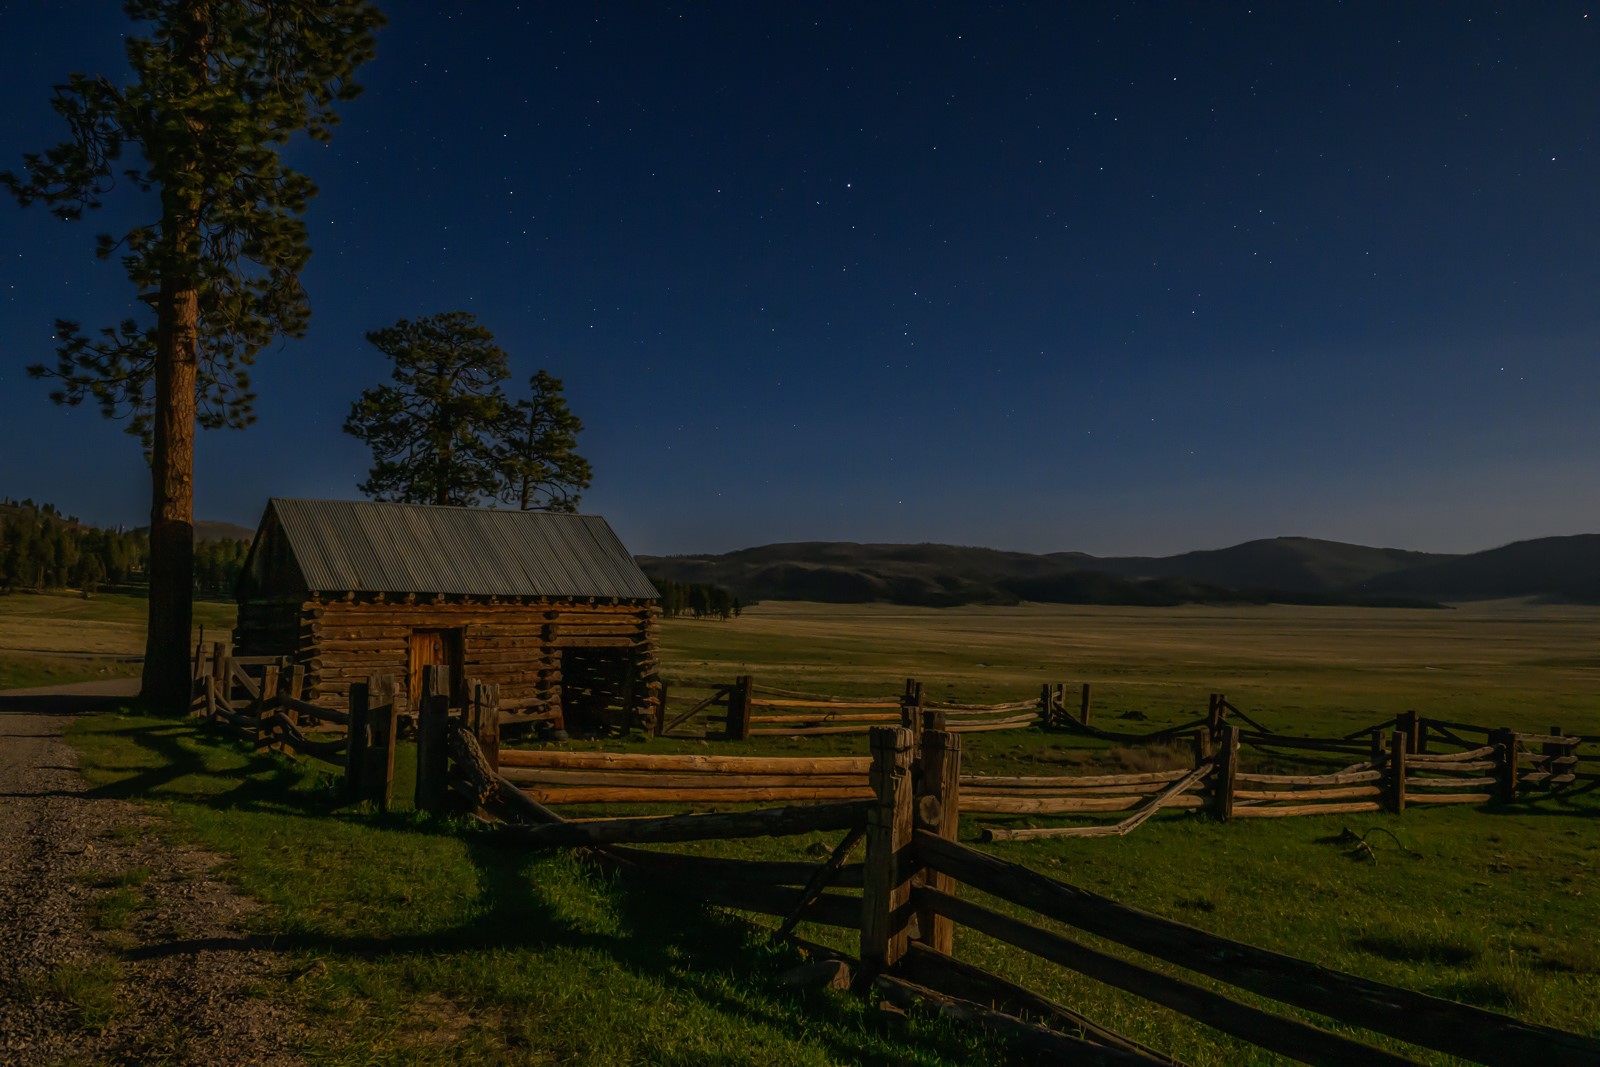 A historic, wooden barn overlooking a large valley at night.